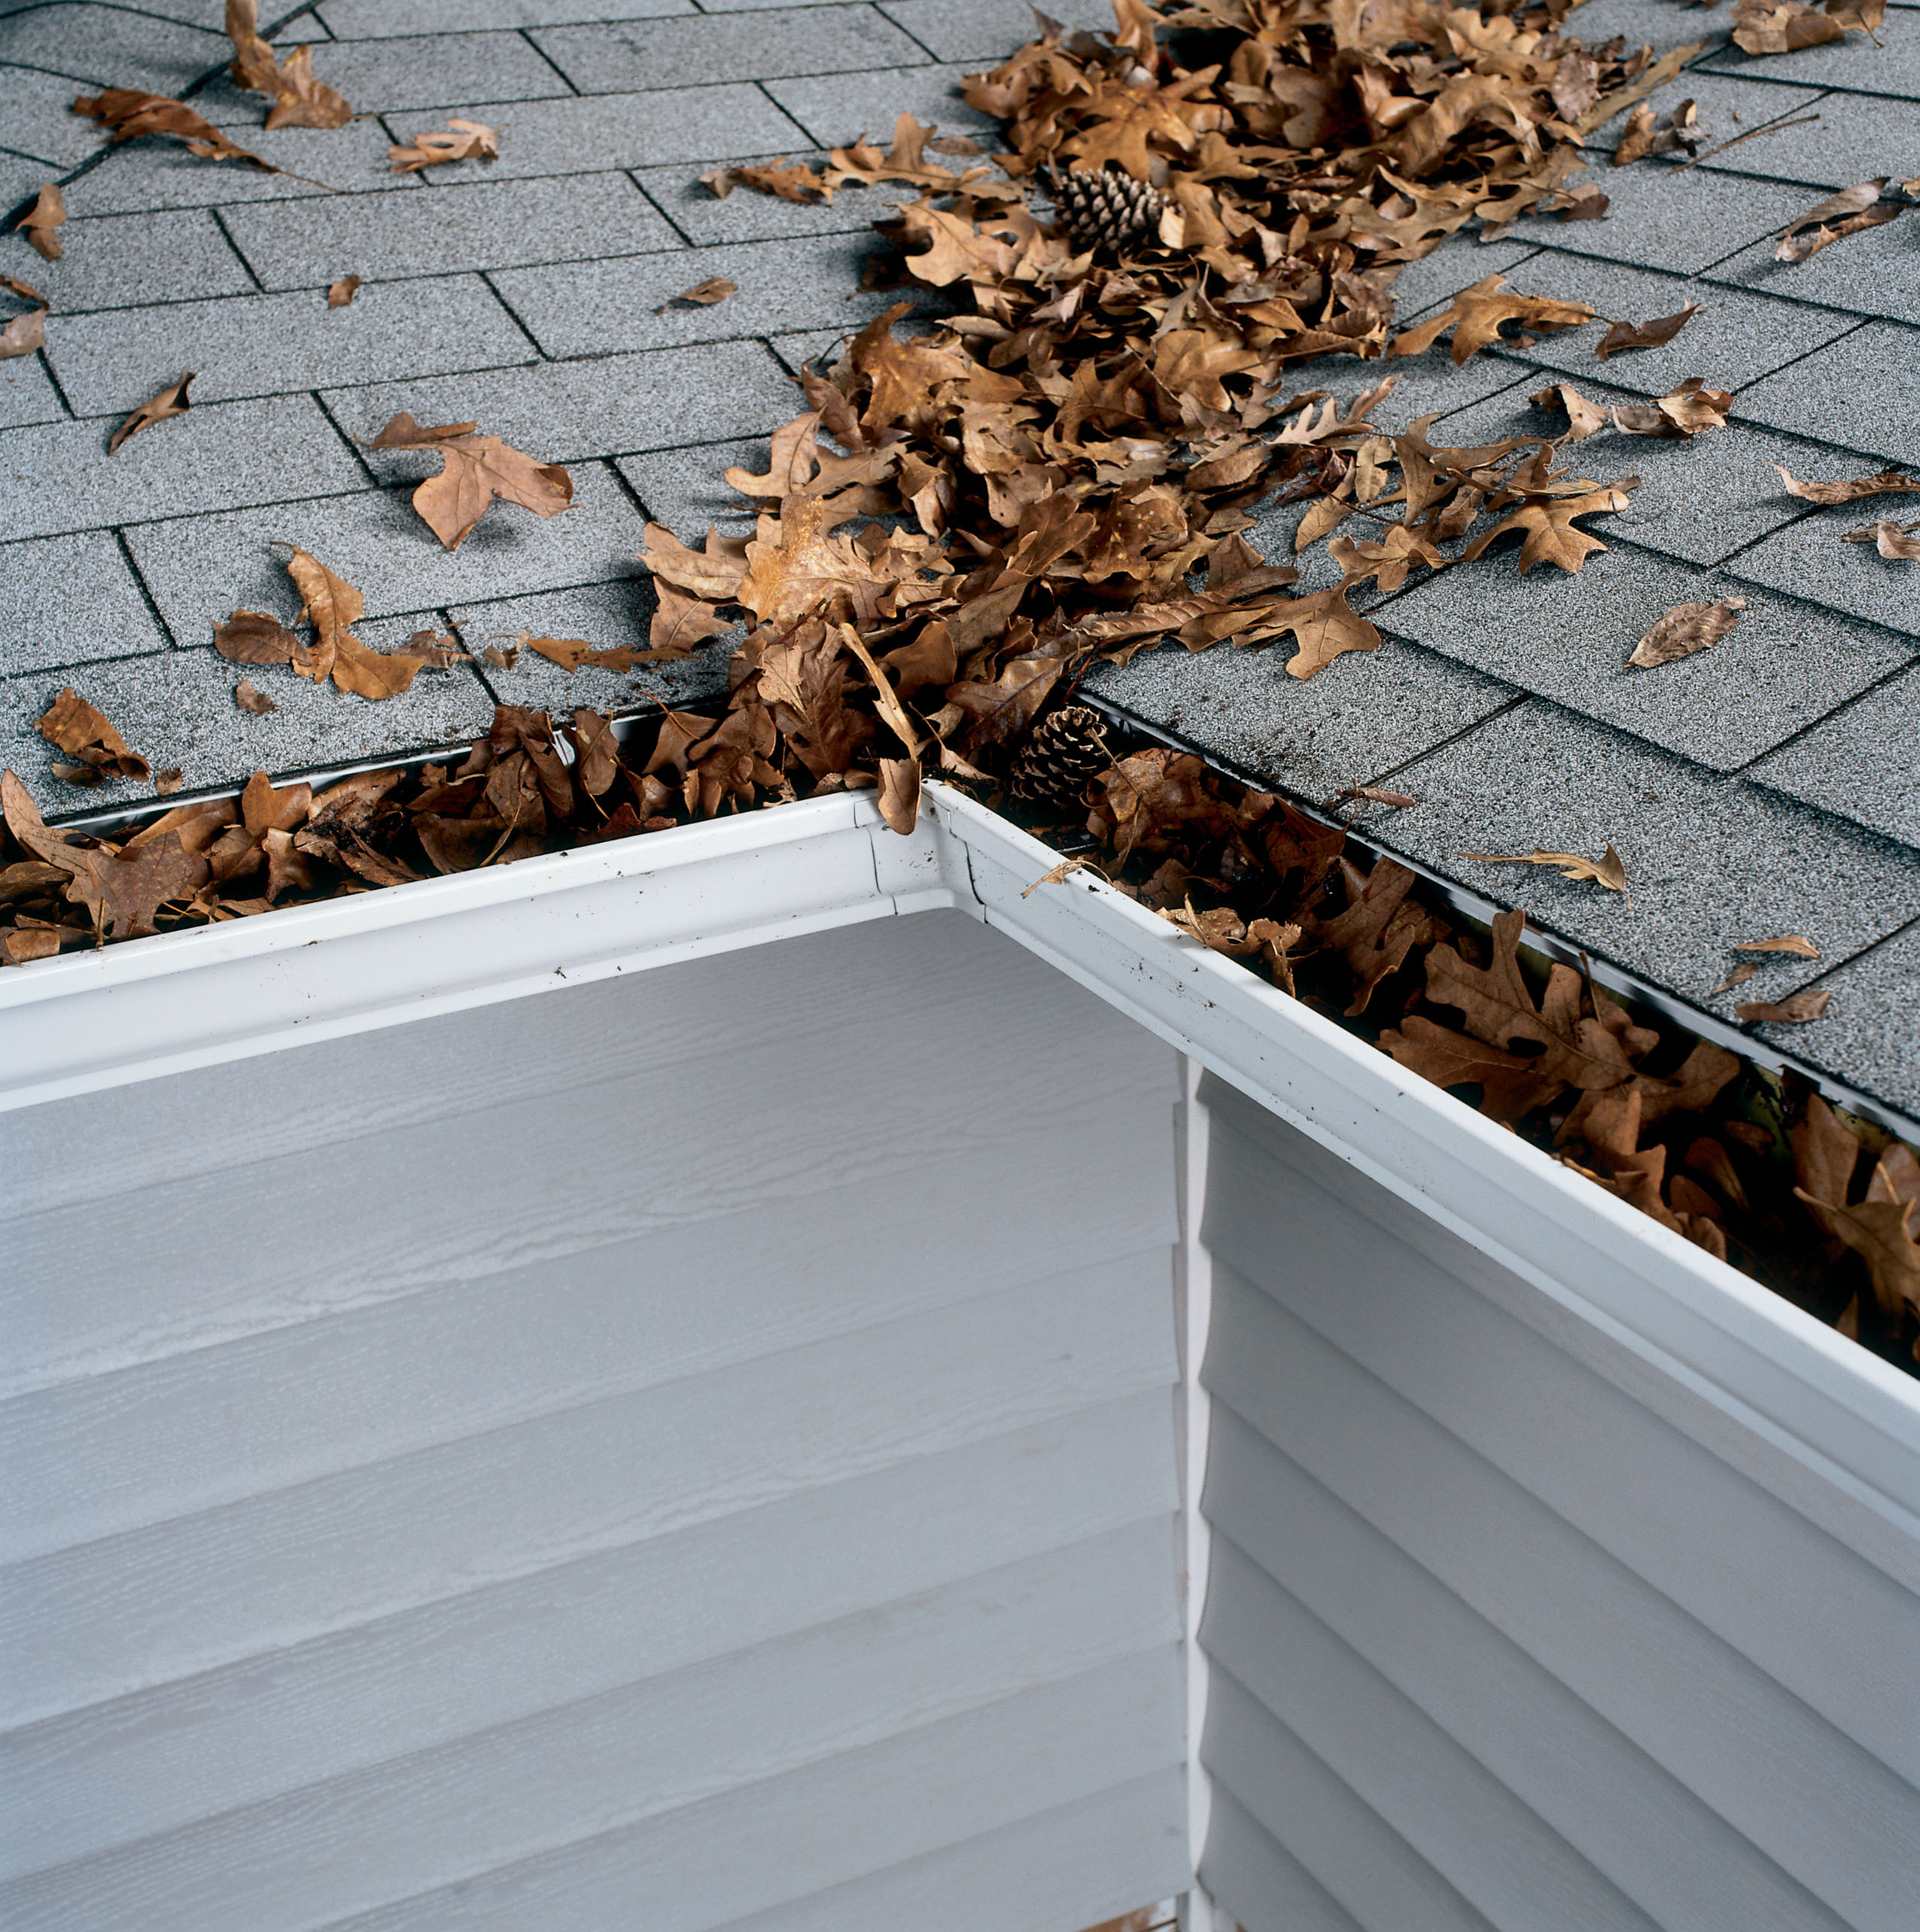 New England gutters that are clogged with debris do not function properly. A Gutter Guard from